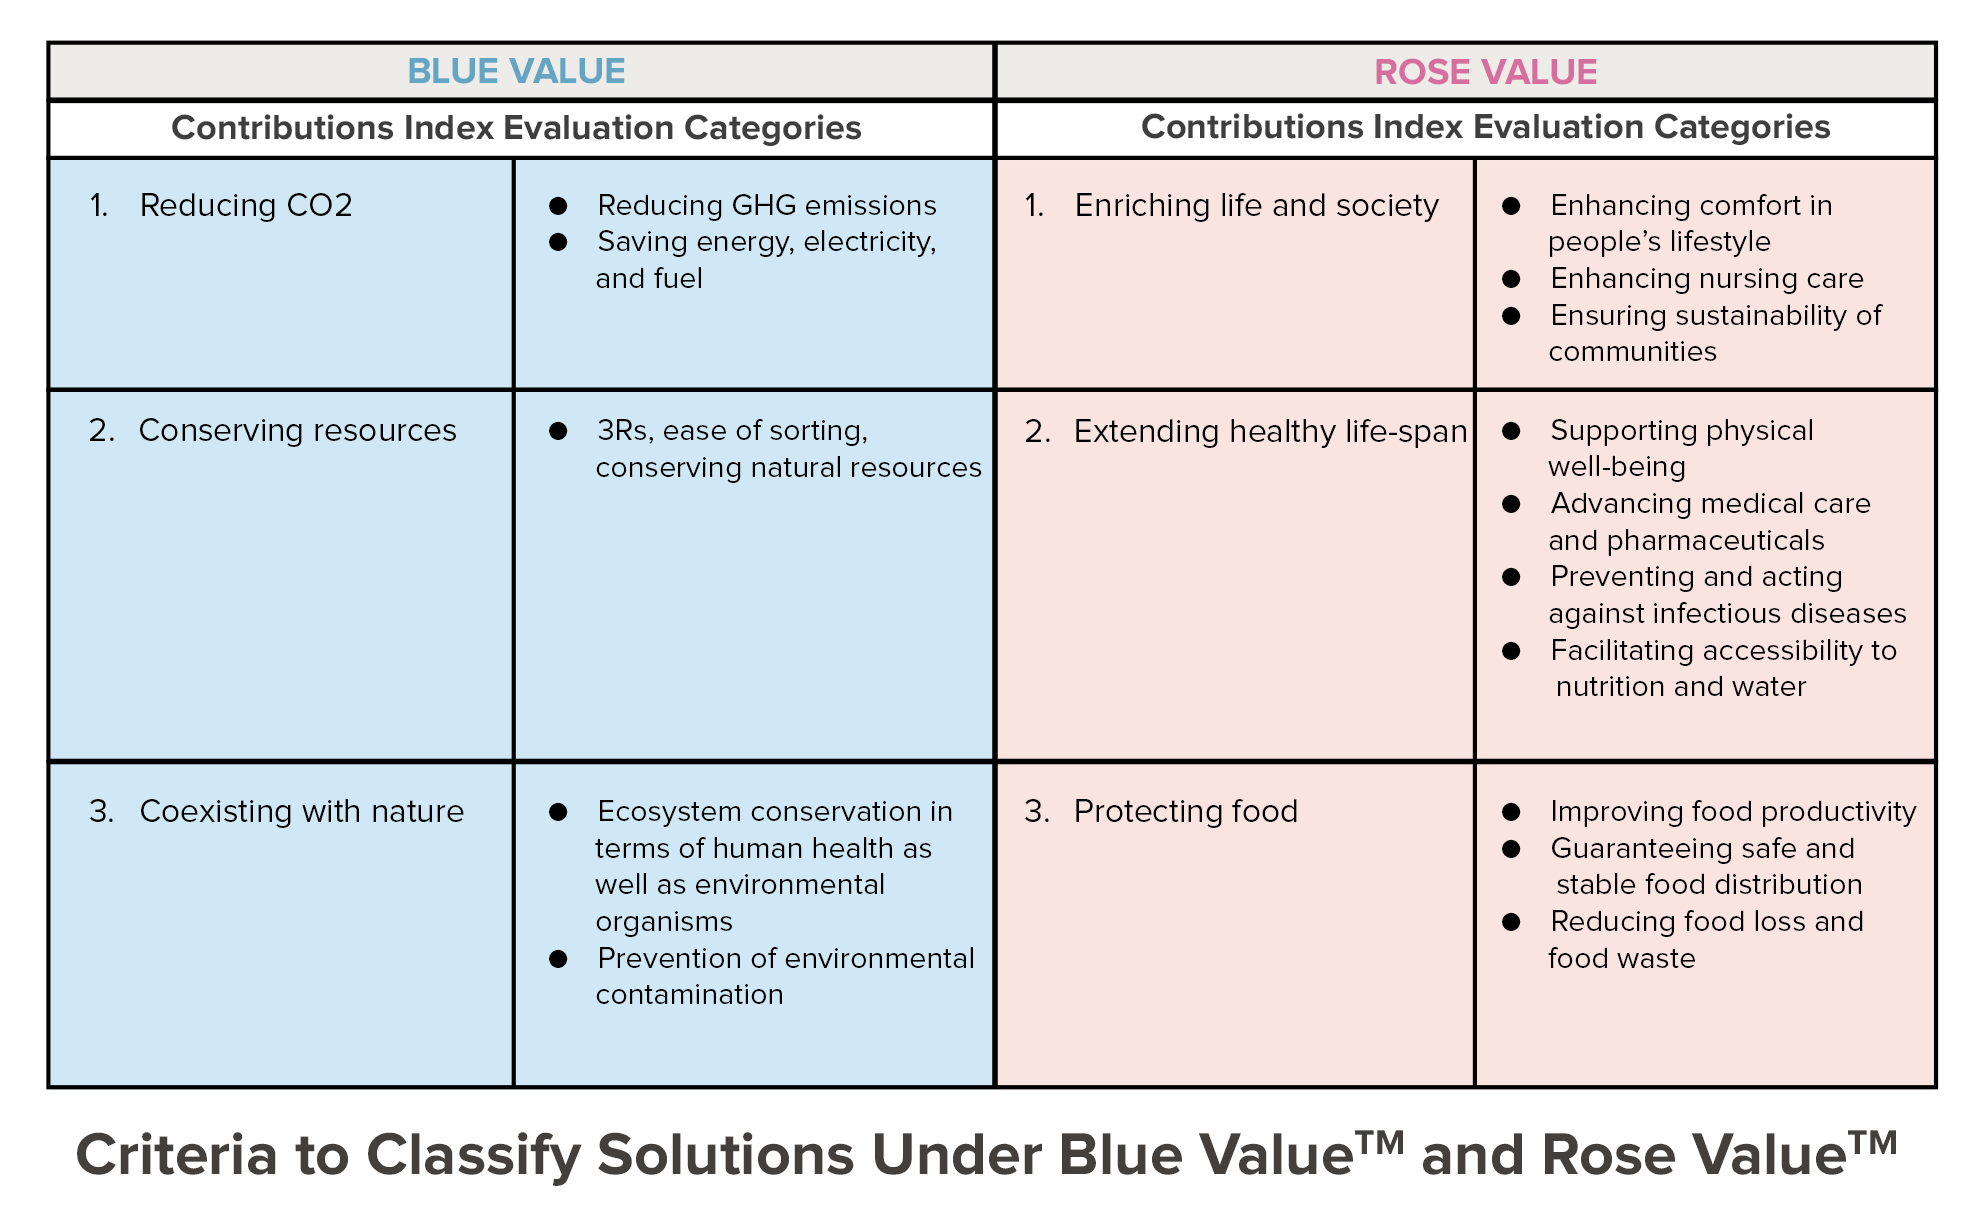 Criteria to Classify Solutions Under Blue Value™ and Rose Value™